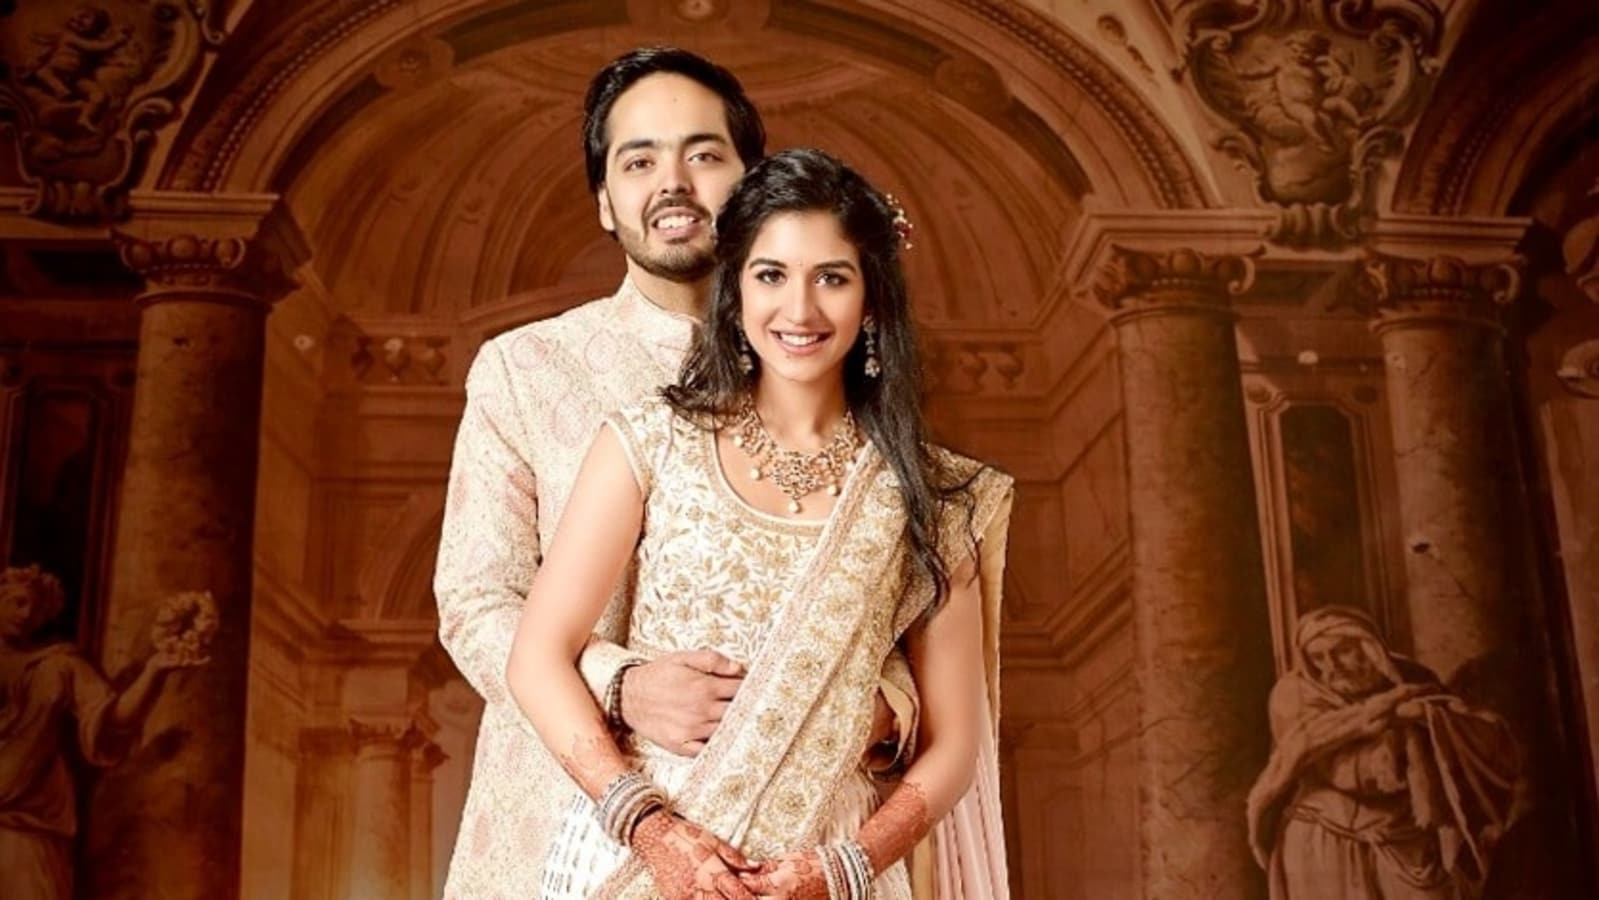 Before Anant Ambani's wedding to Radhika Merchant, a look at his weight loss journey when he lost 108 kg in 18 months